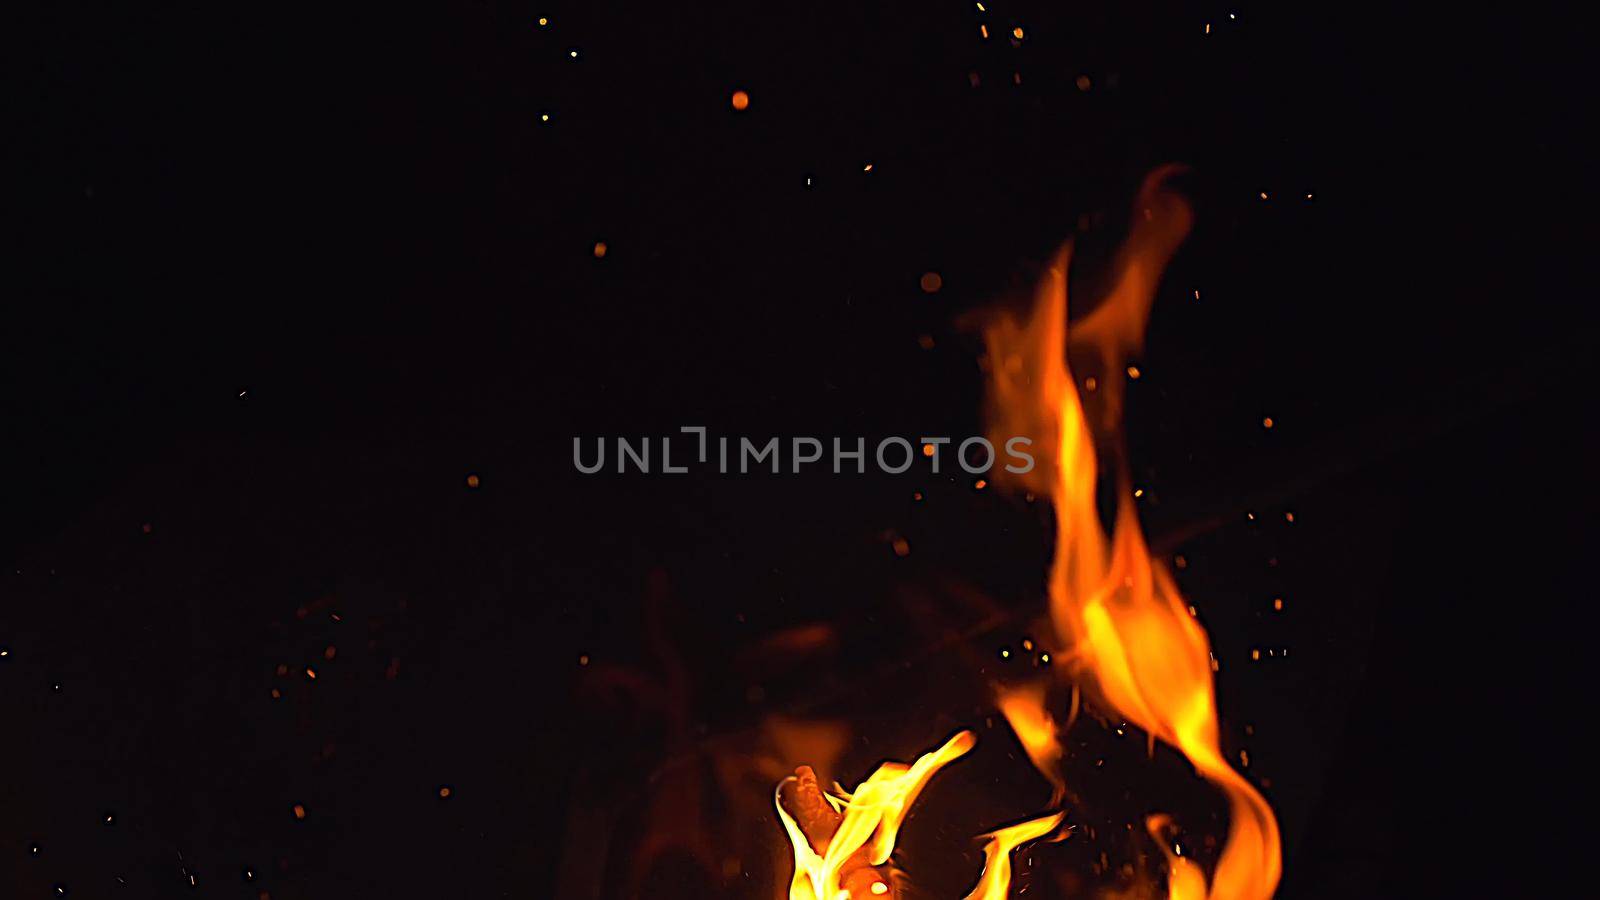 Fire flames and a lot of bright sparks are flying from the fire at black background